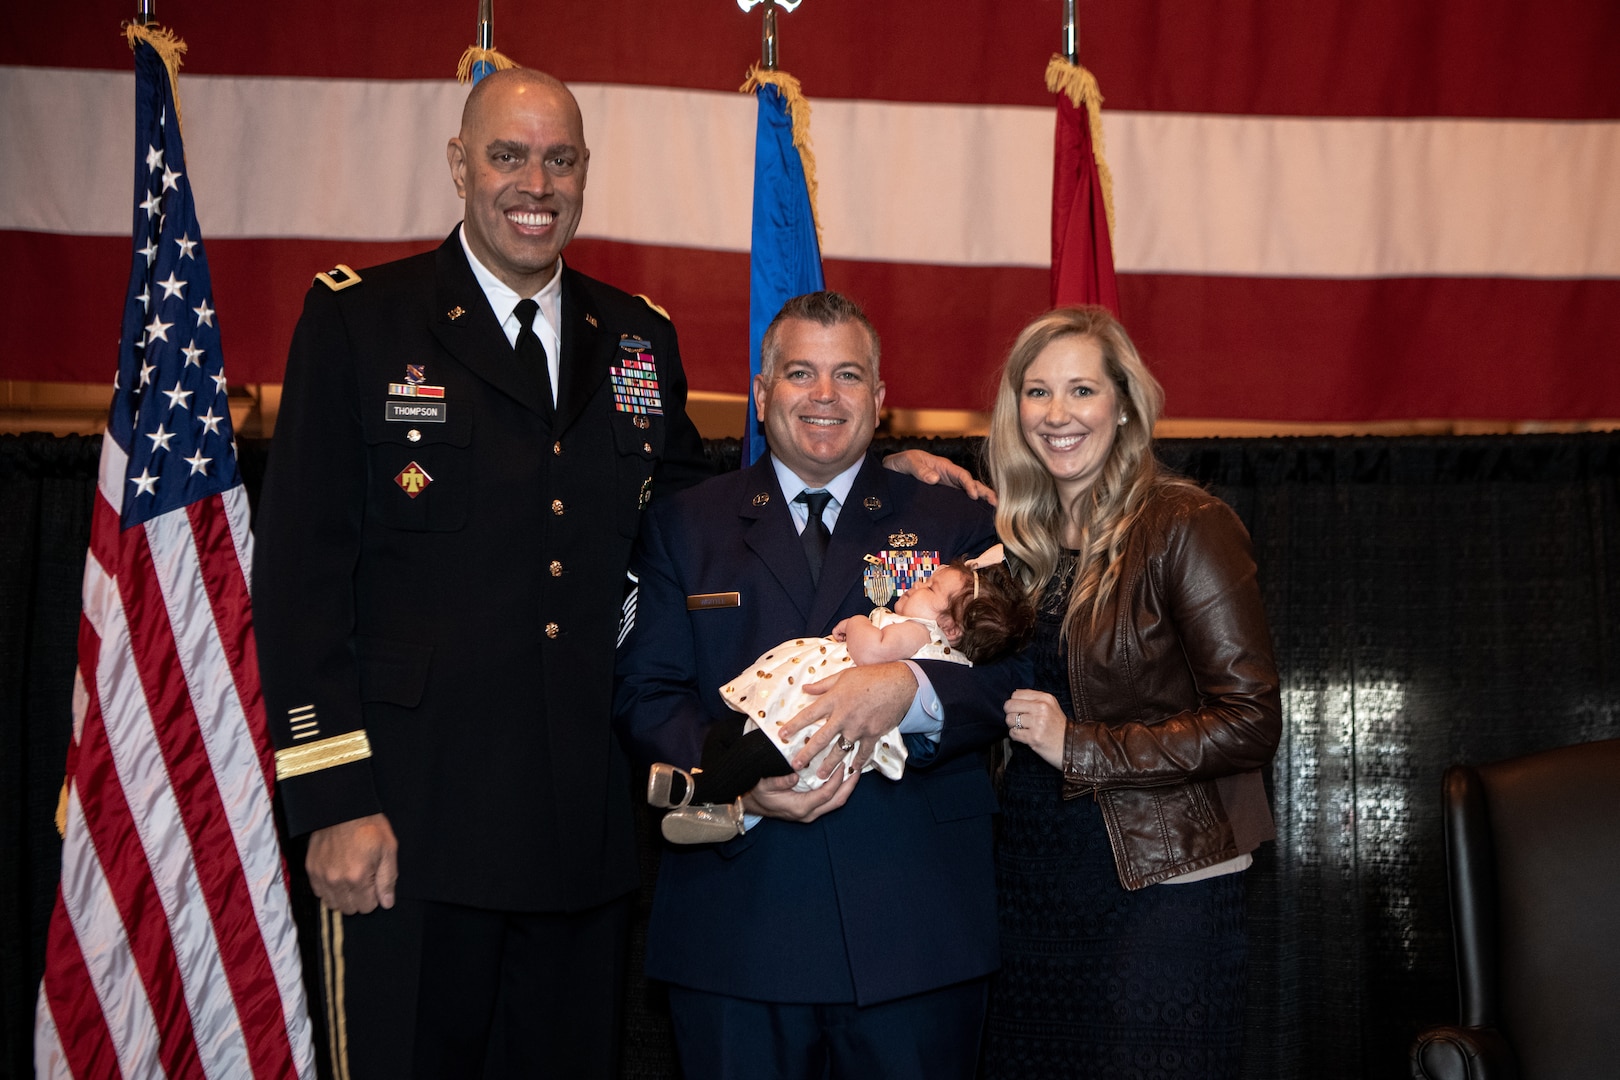 Master Sgt. Bryan Whittle, with the 205th Engineering and Installation Squadron, with his wife, Shannon Whittle, and Maj. Gen. Michael C. Thompson, adjutant general for Oklahoma, after receiving the Airman’s Medal in a ceremony at Will Rogers Air National Guard Base in Oklahoma City, Dec. 8, 2019. The Airman’s Medal is the highest noncombat award given in the Air Force and awarded to service members who distinguish themselves by a heroic act, usually at the voluntary risk of their own life.